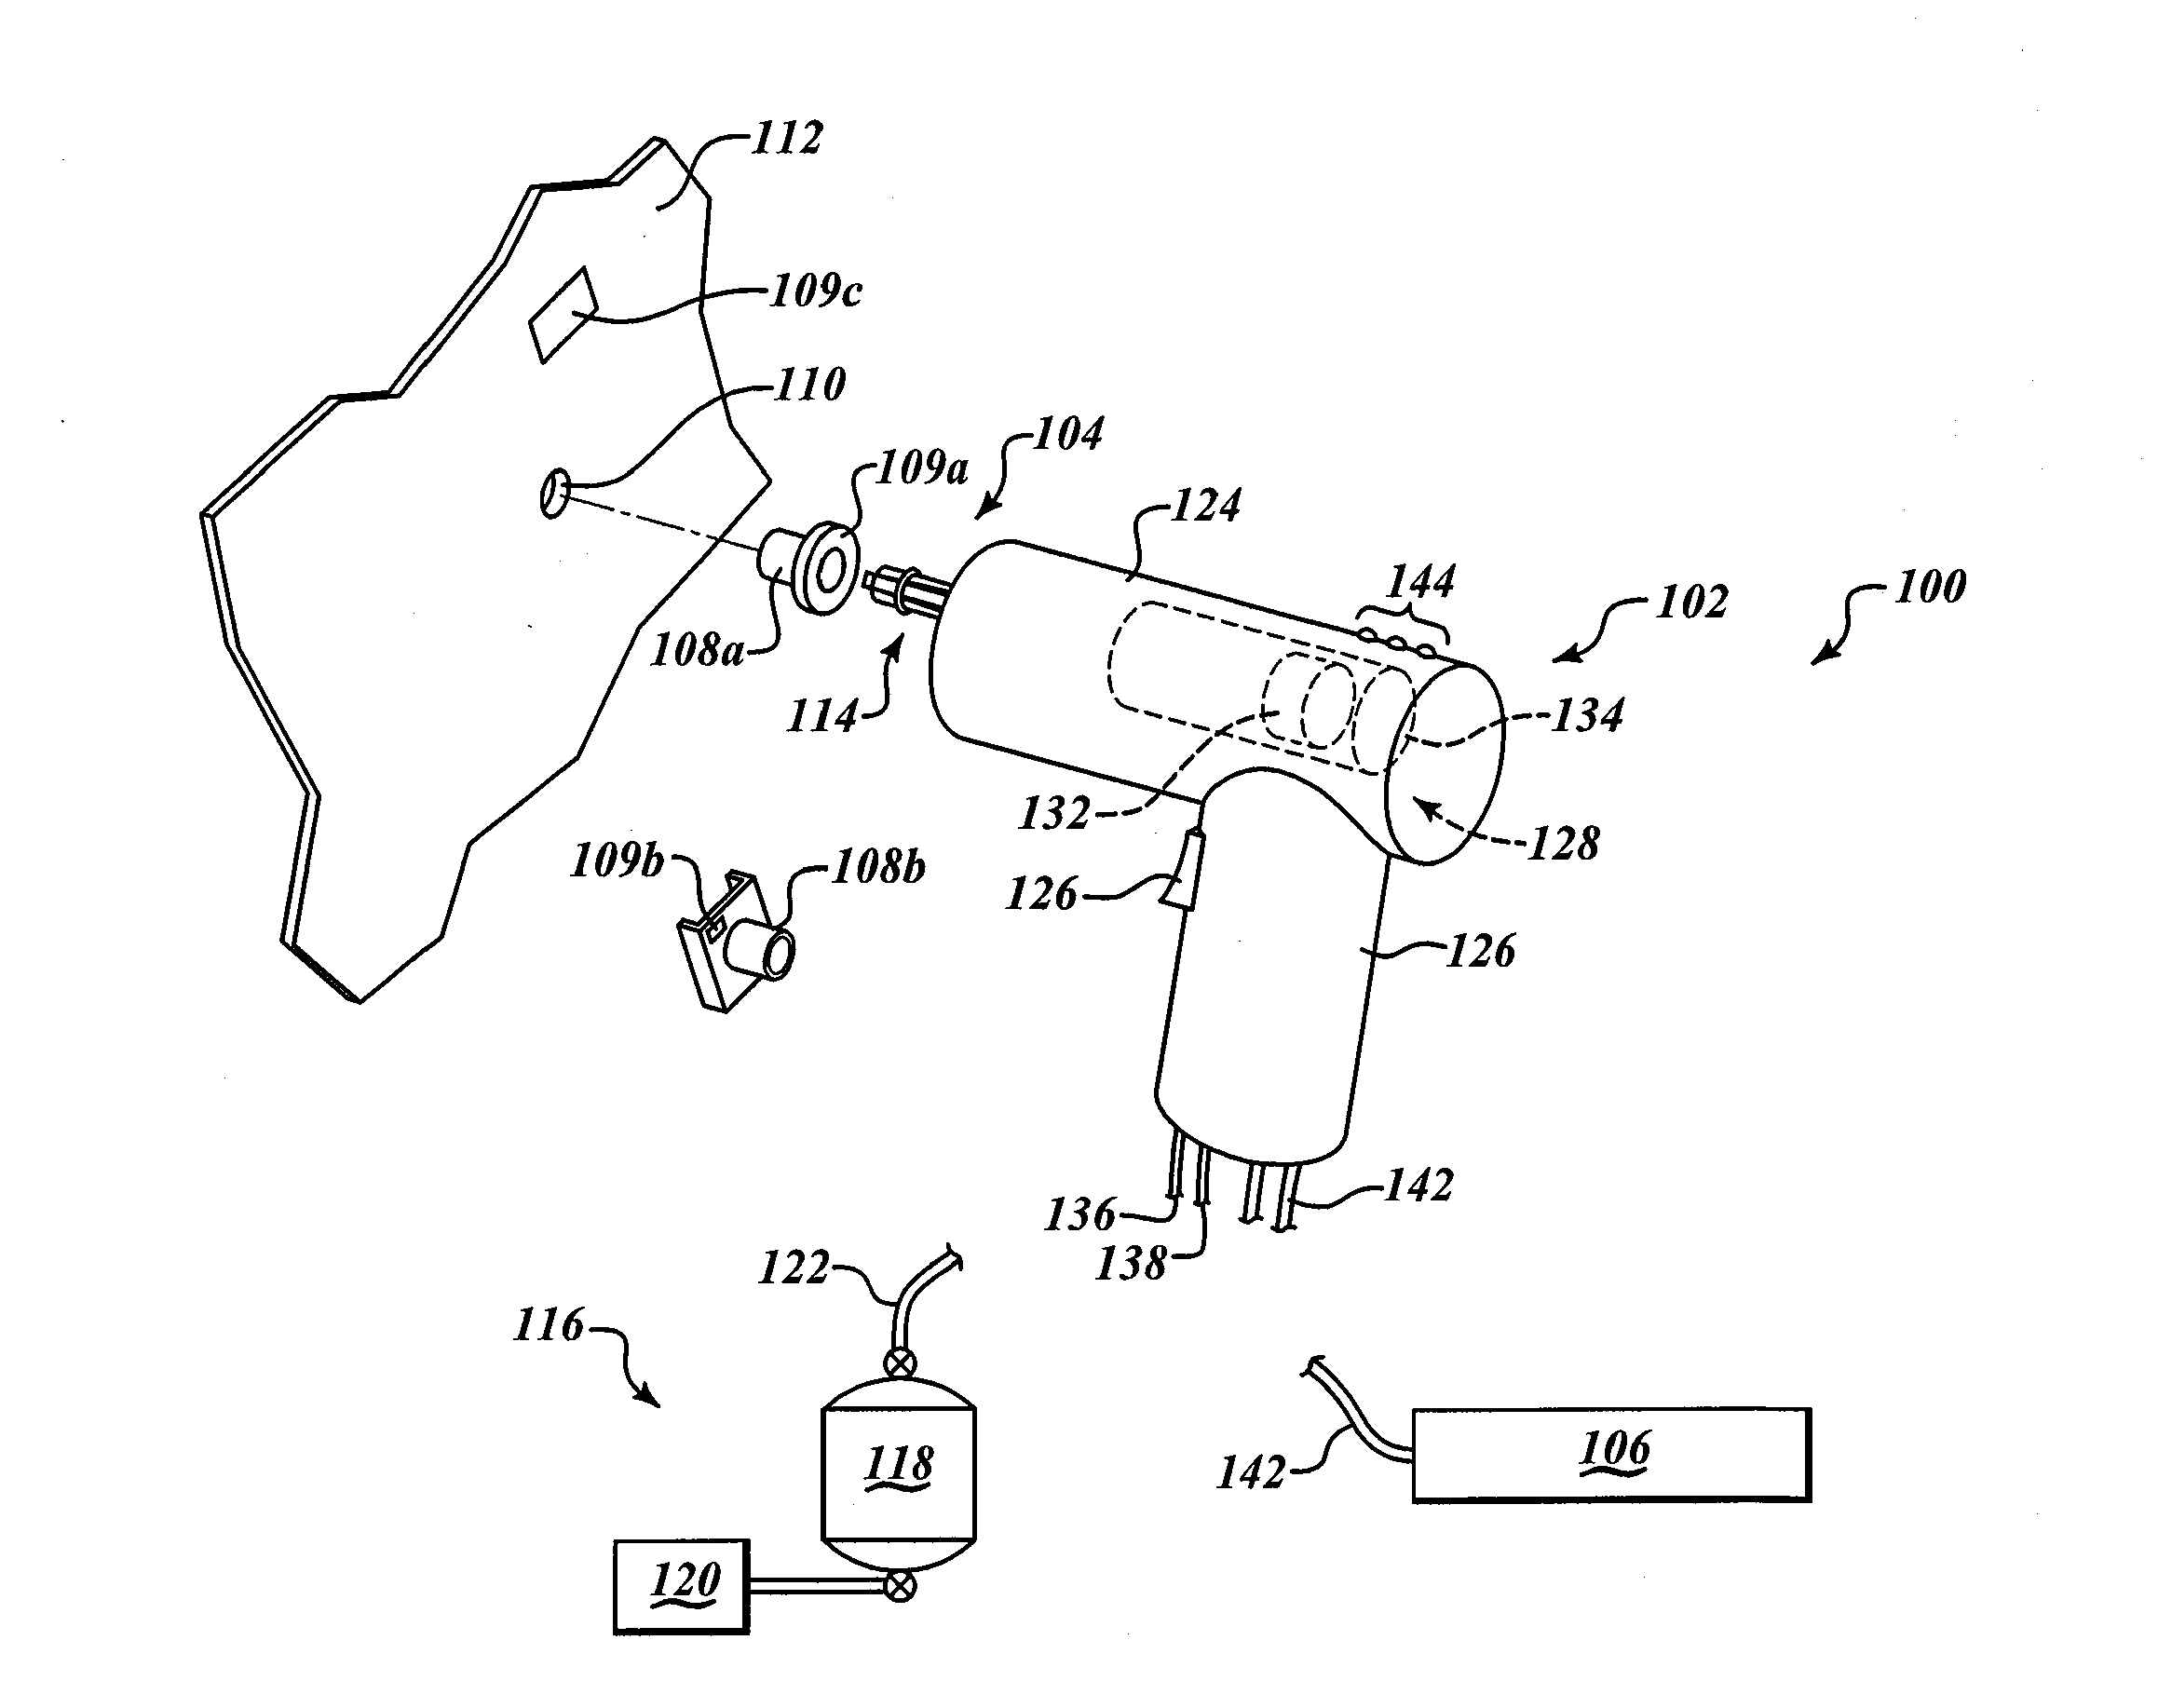 Smart installation/processing systems, components, and methods of operating the same